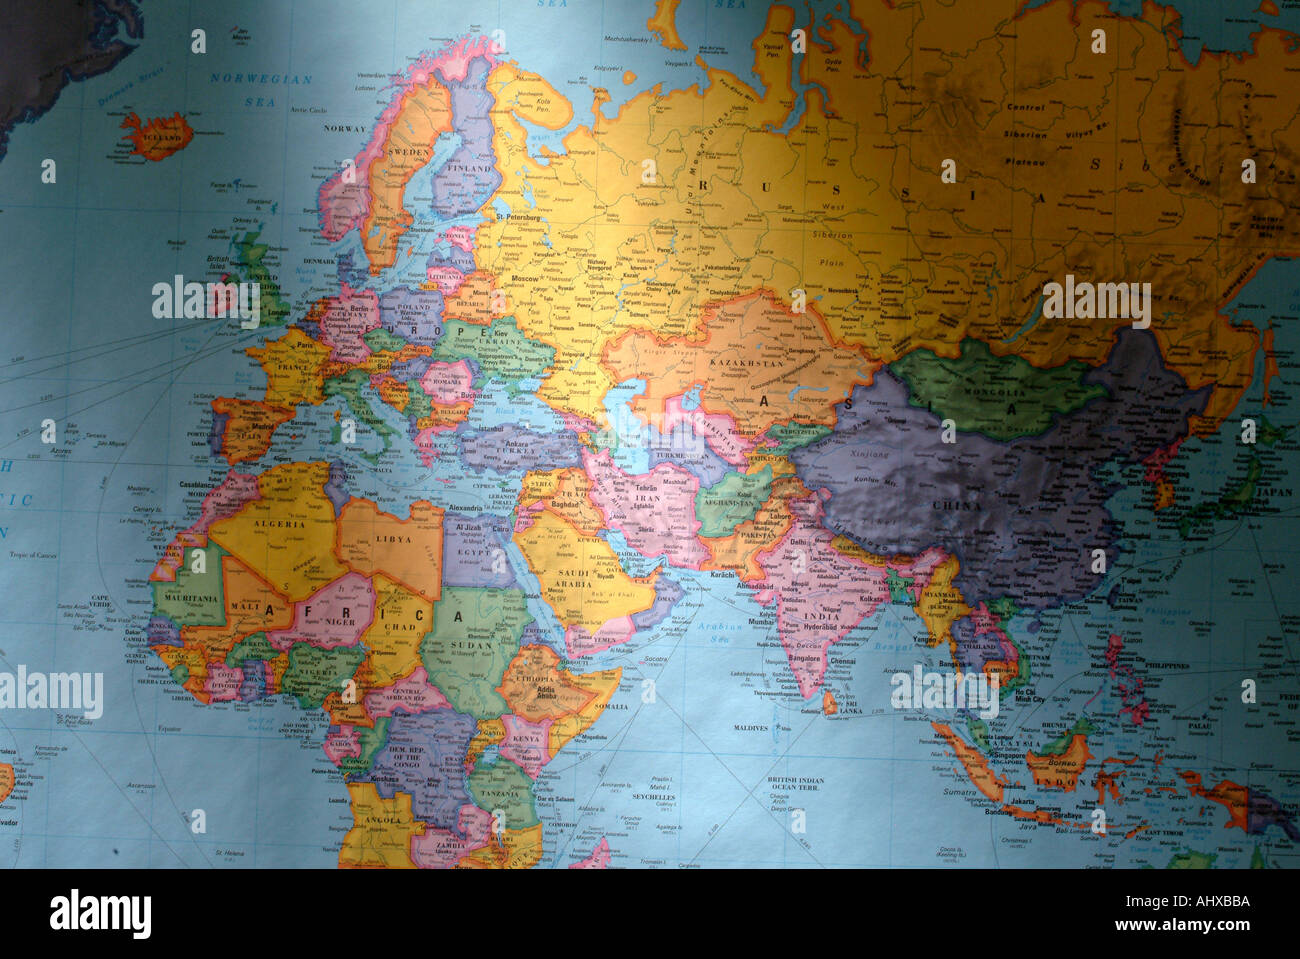 illustrated world map with countries and continents Stock Photo